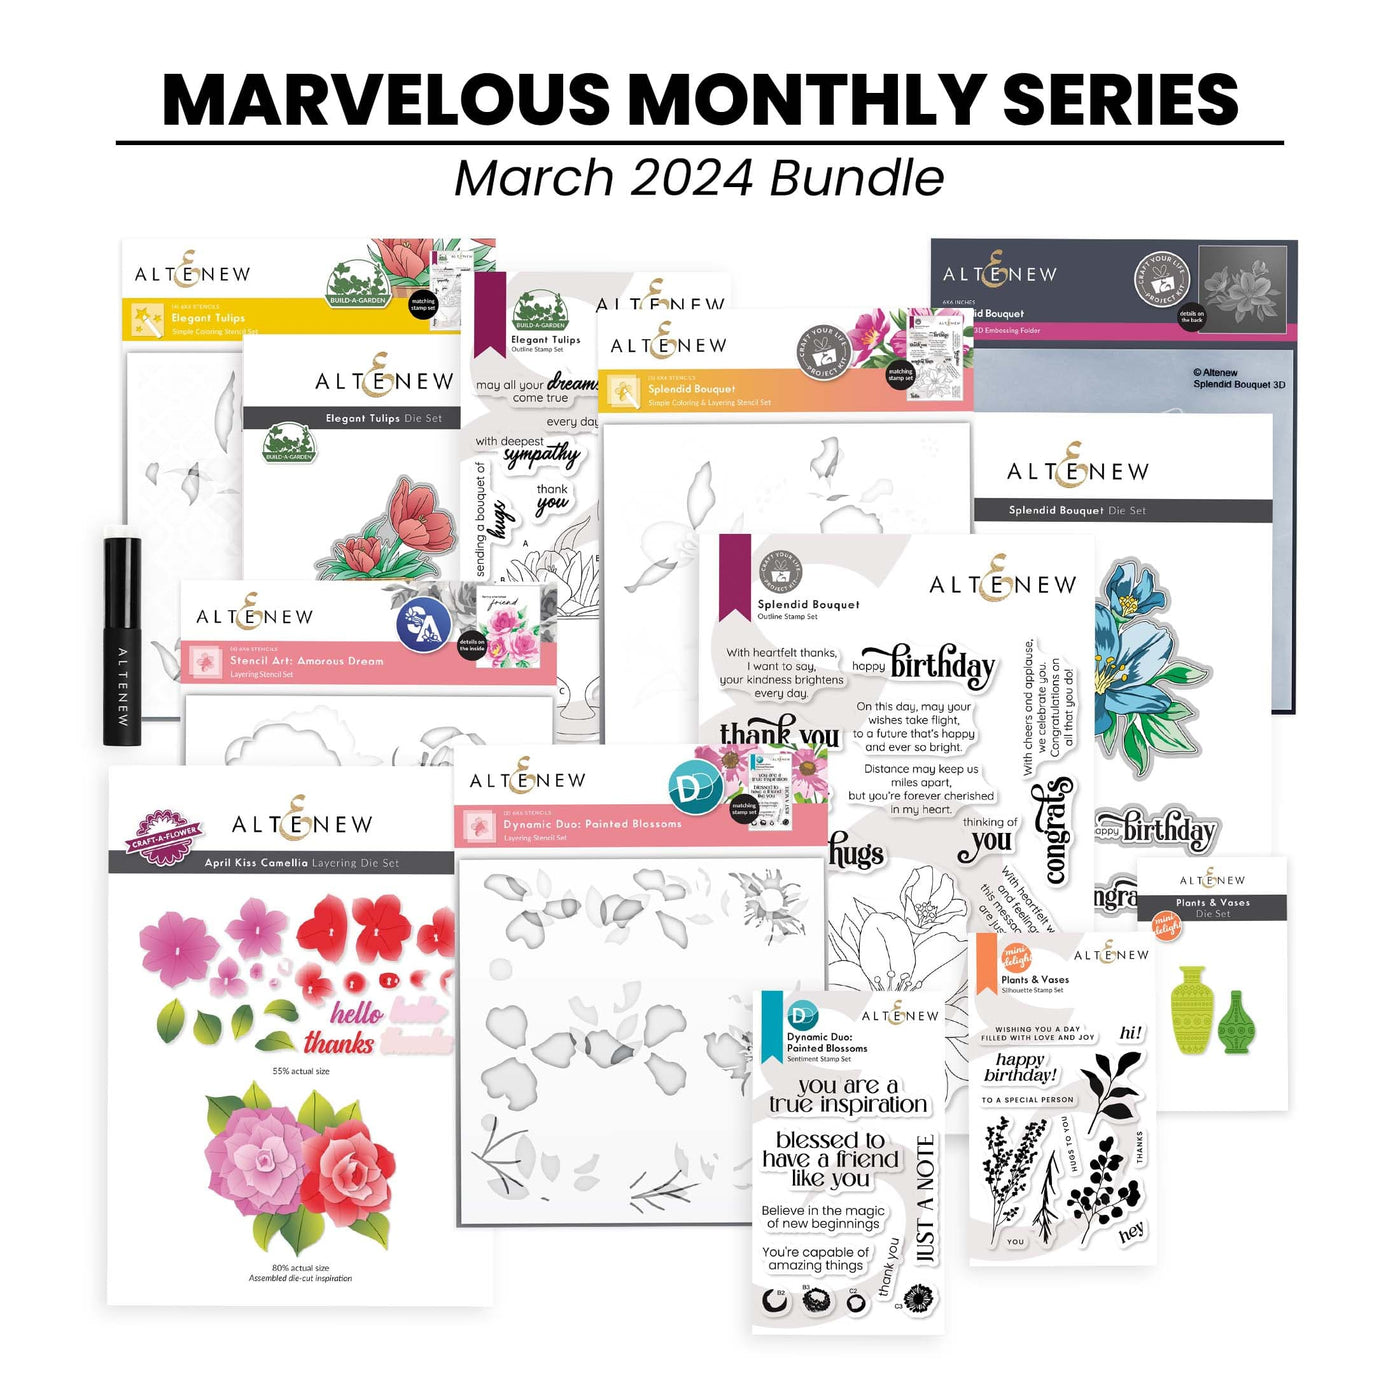 Marvelous Monthly Series Bundle - March 2024